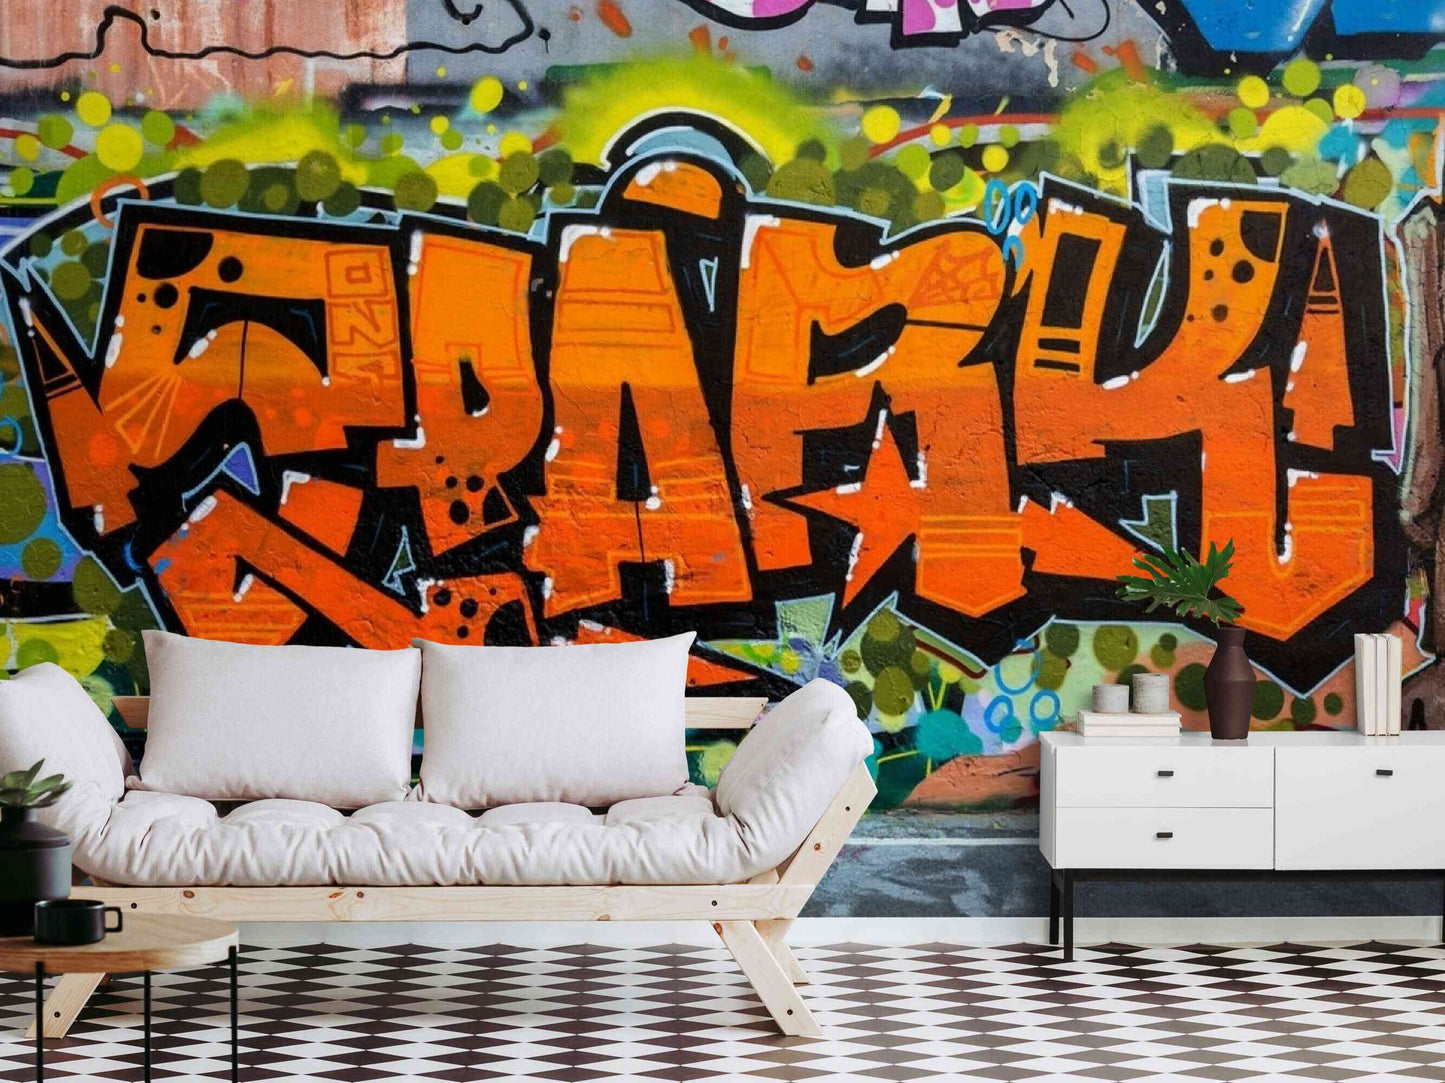 An image of a wallpaper with a graffiti design in various colors, including shades of orange, green, pink, and yellow. The design features bold shapes, lines, and lettering, resembling traditional street art. The wallpaper is used to decorate a teenage bedroom, creating a trendy and urban atmosphere. The design is eye-catching and adds personality and character to the room.